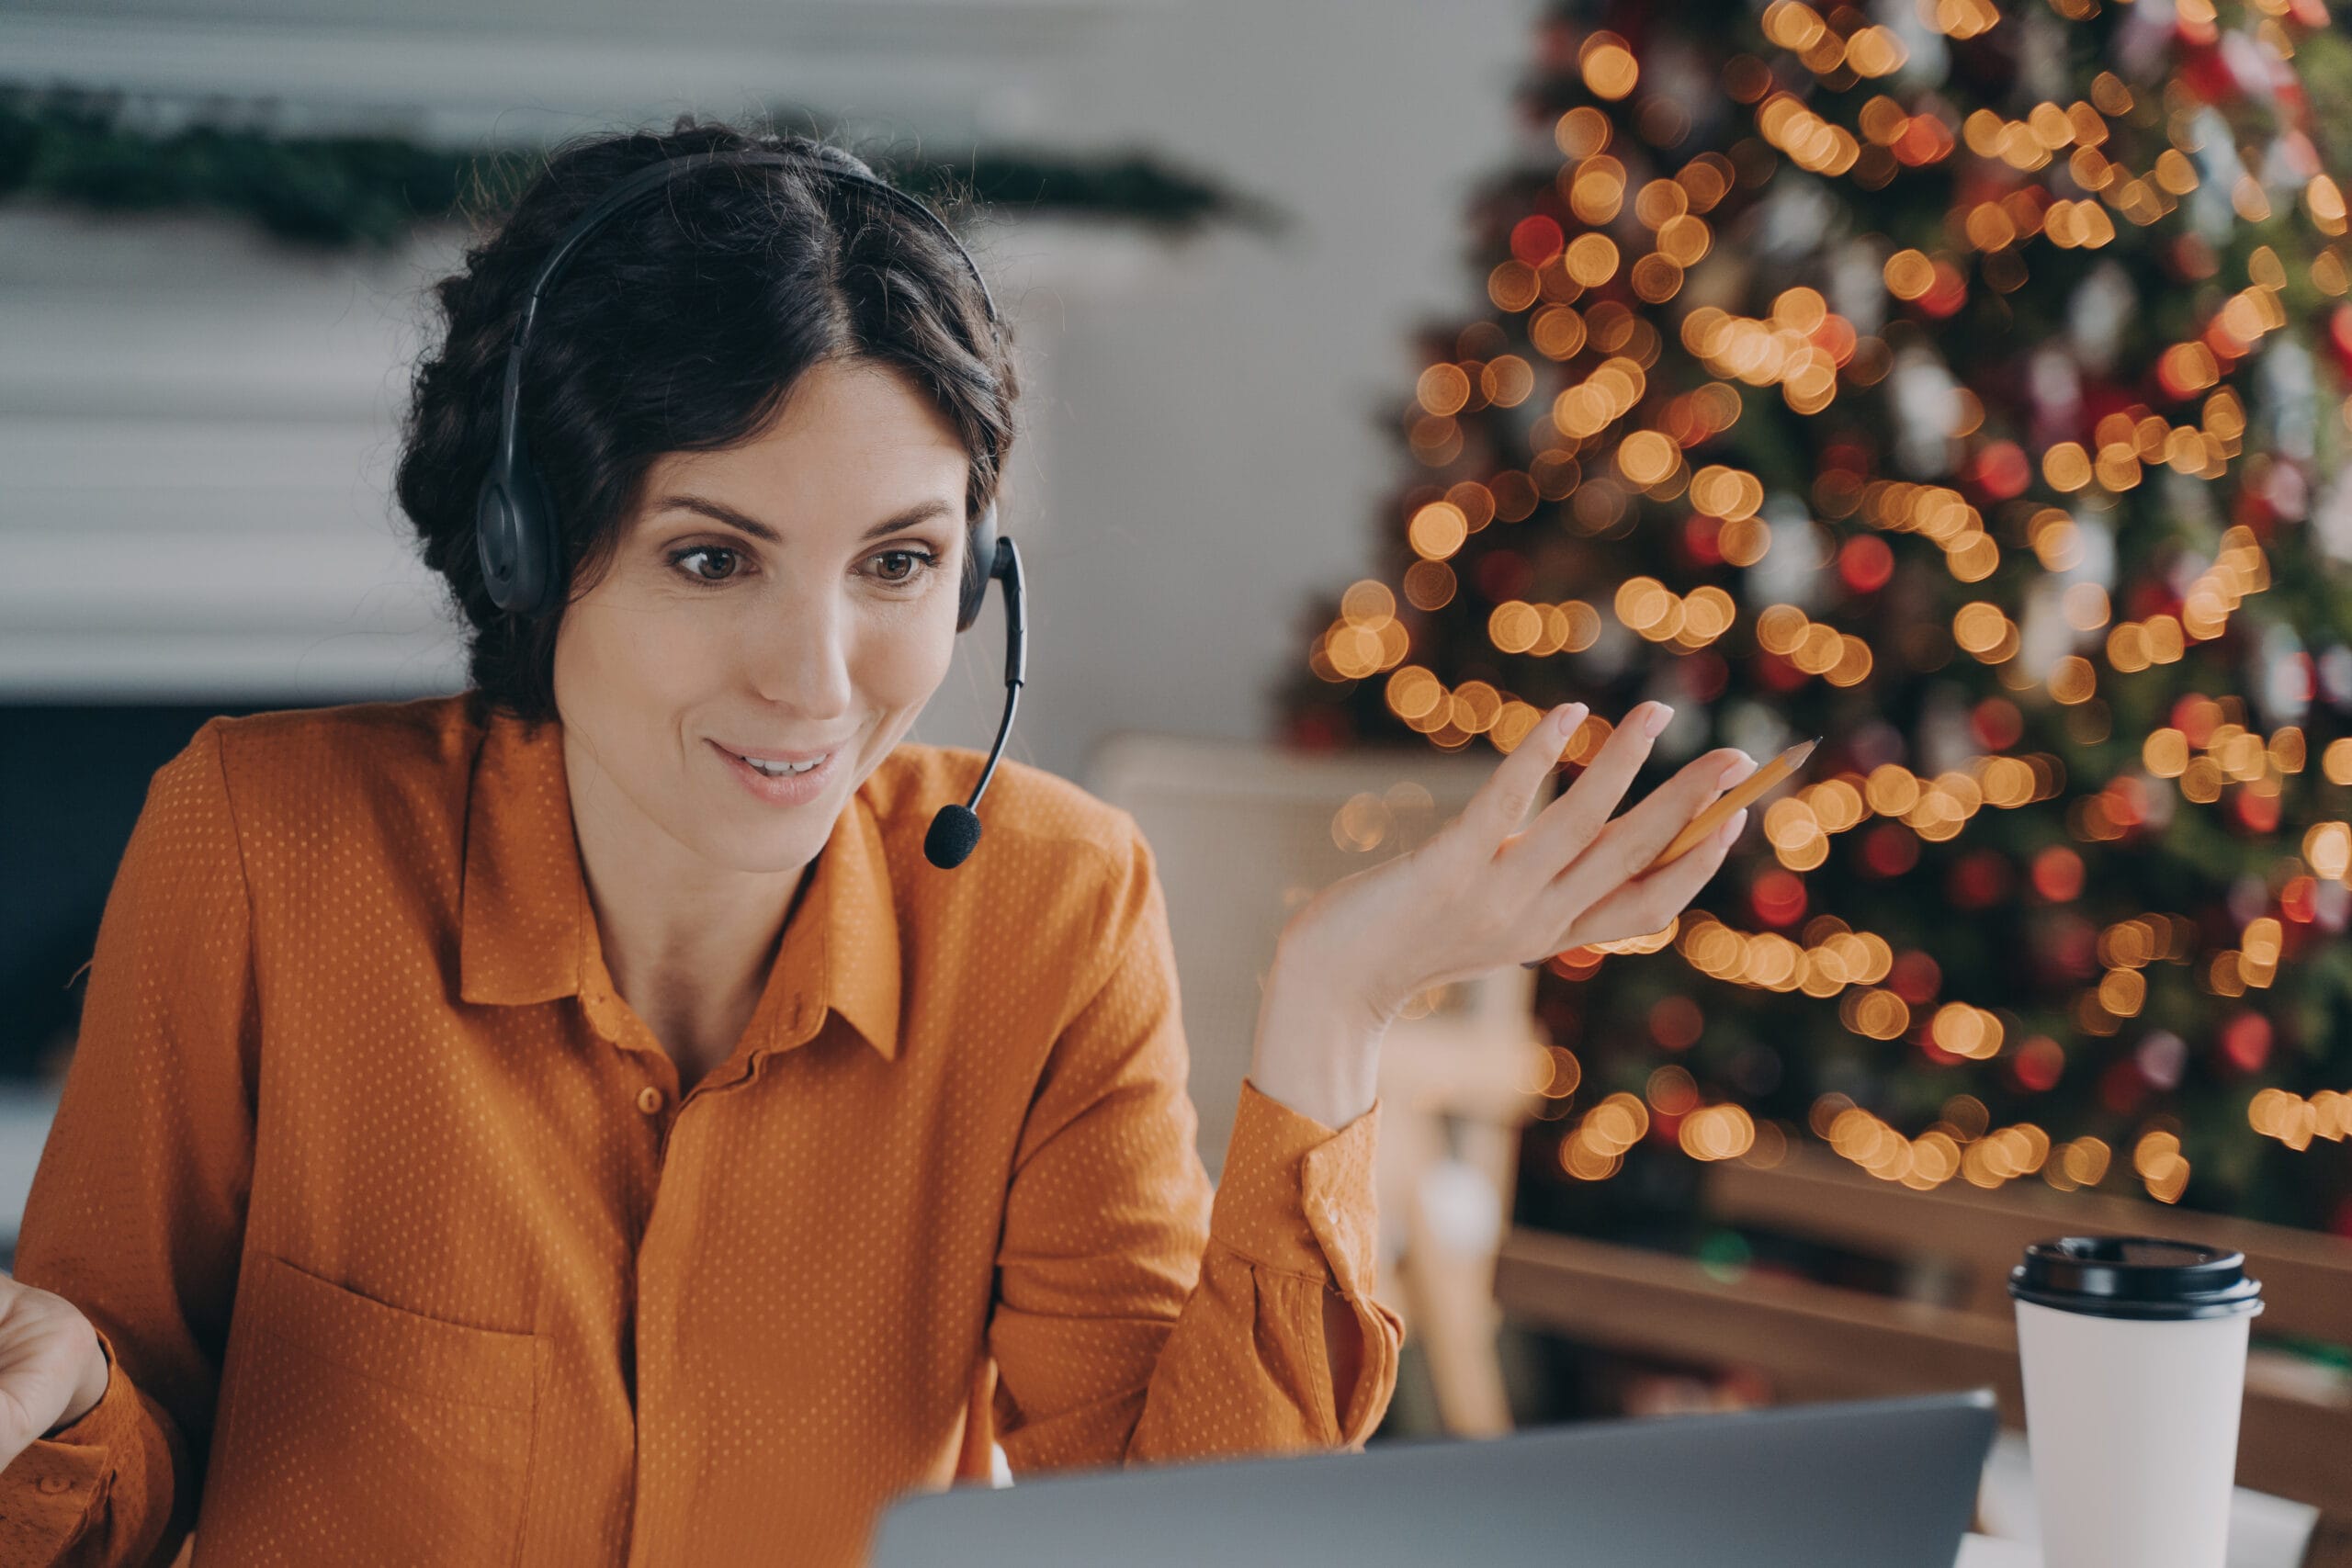 Callcenter Female Consultant In Headset Talking With Customer While Working During Christmas Holidays